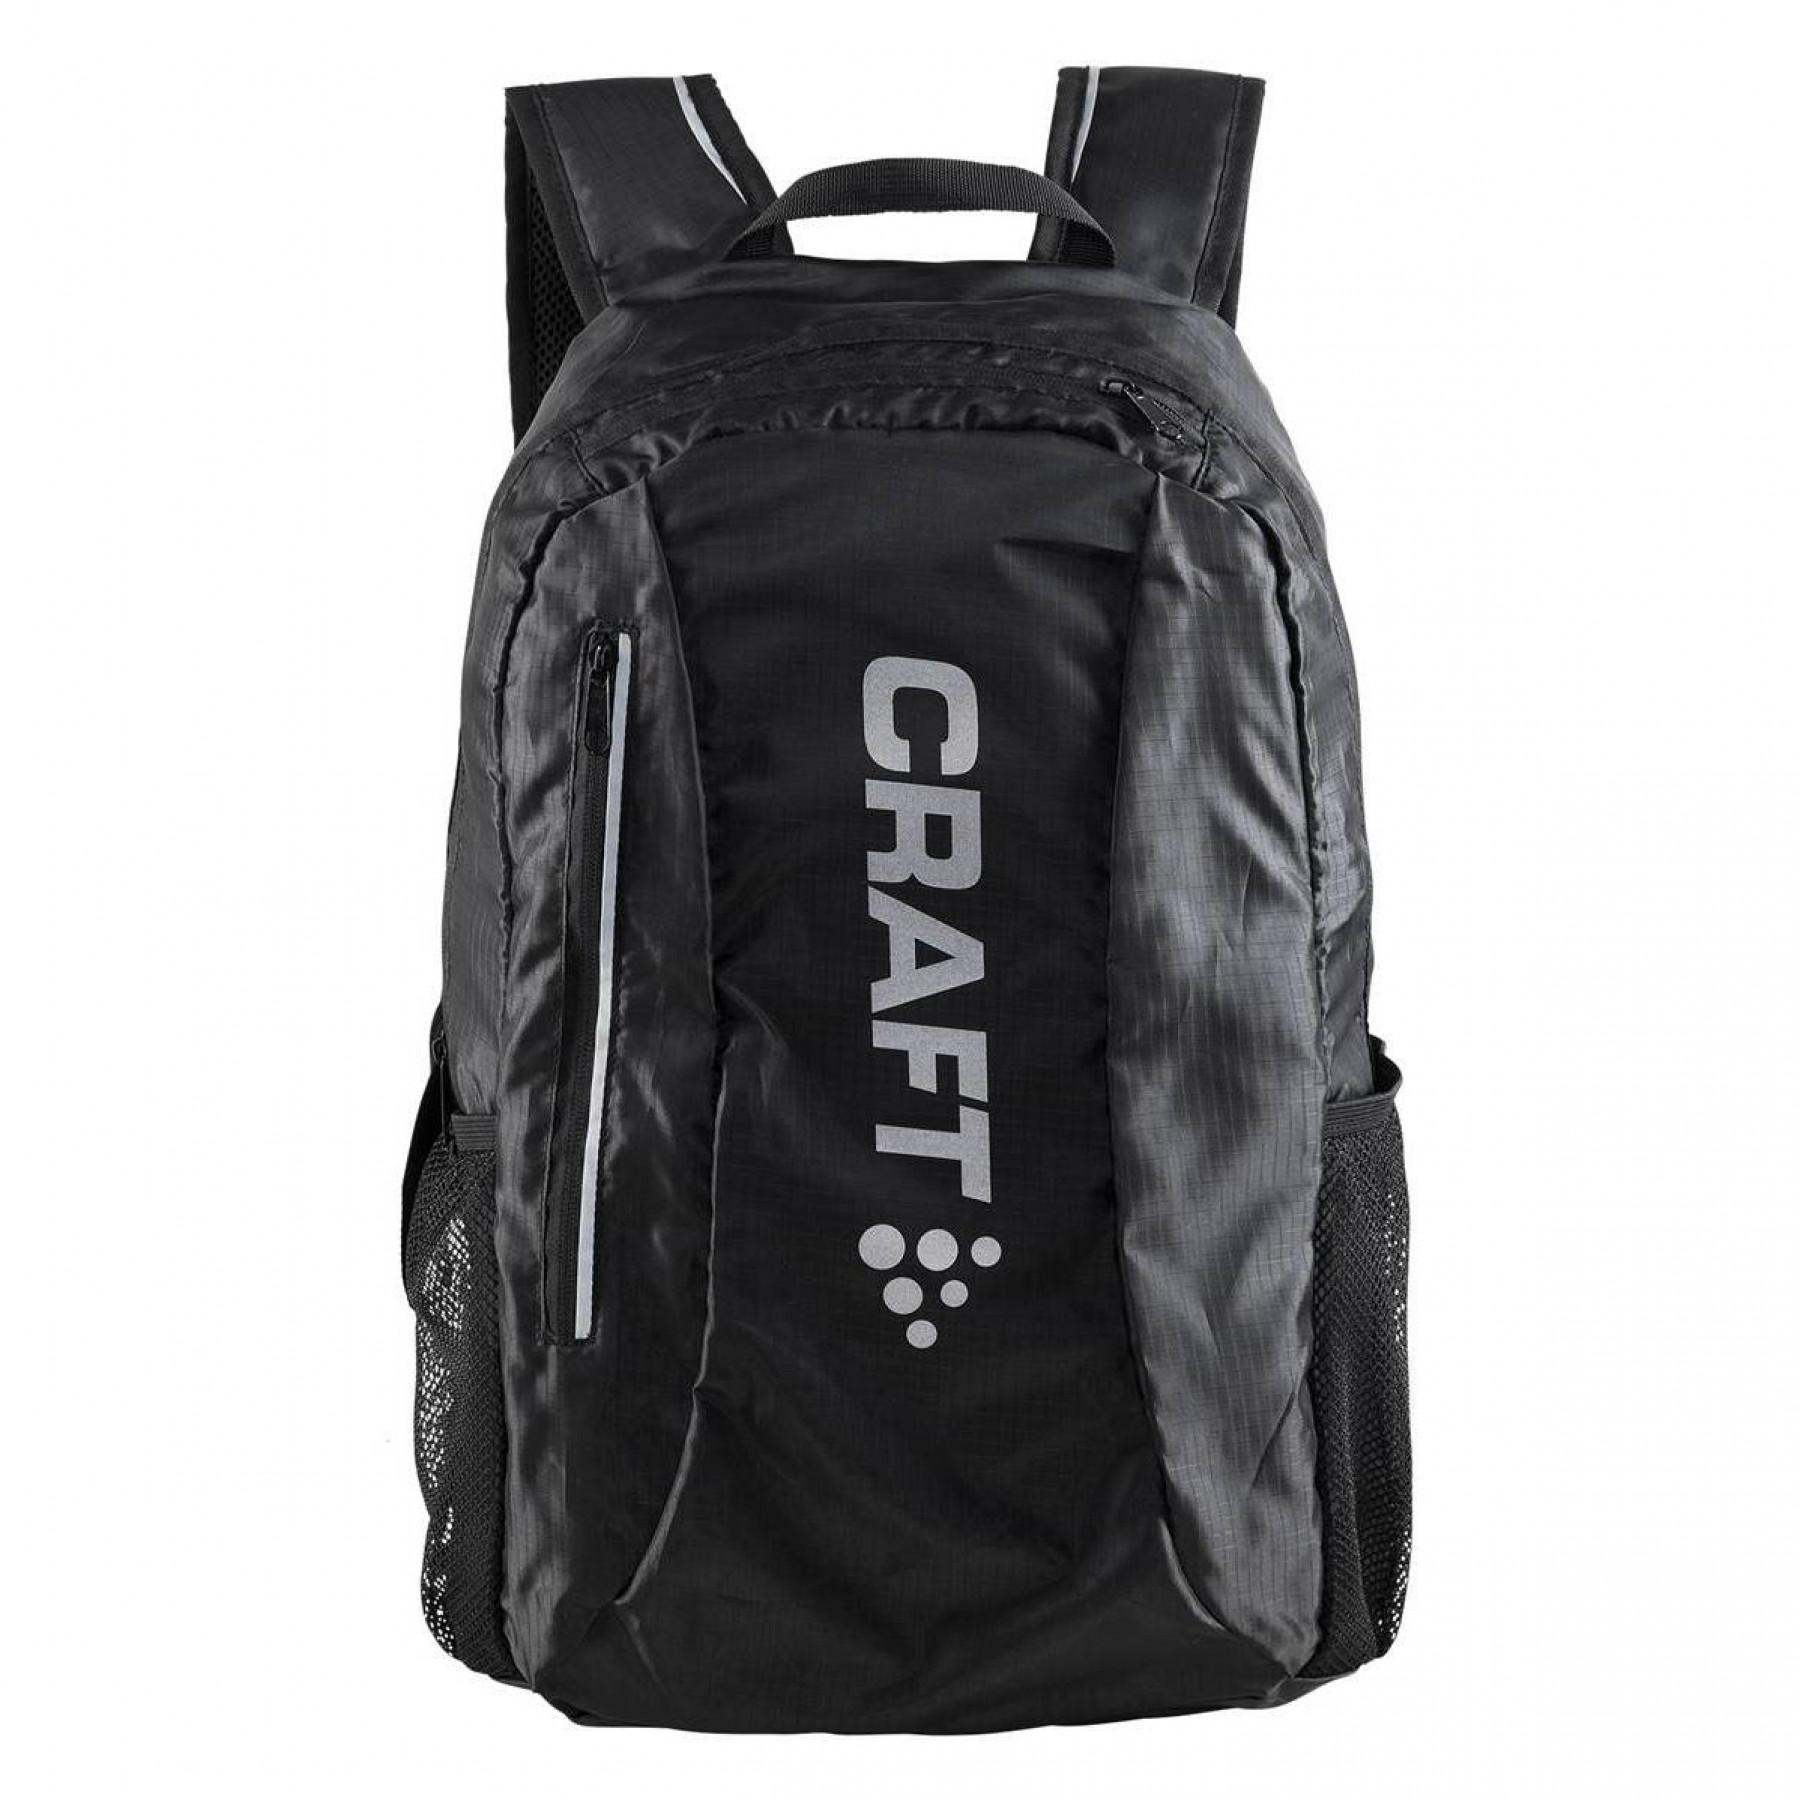 Backpack Craft fitness-training